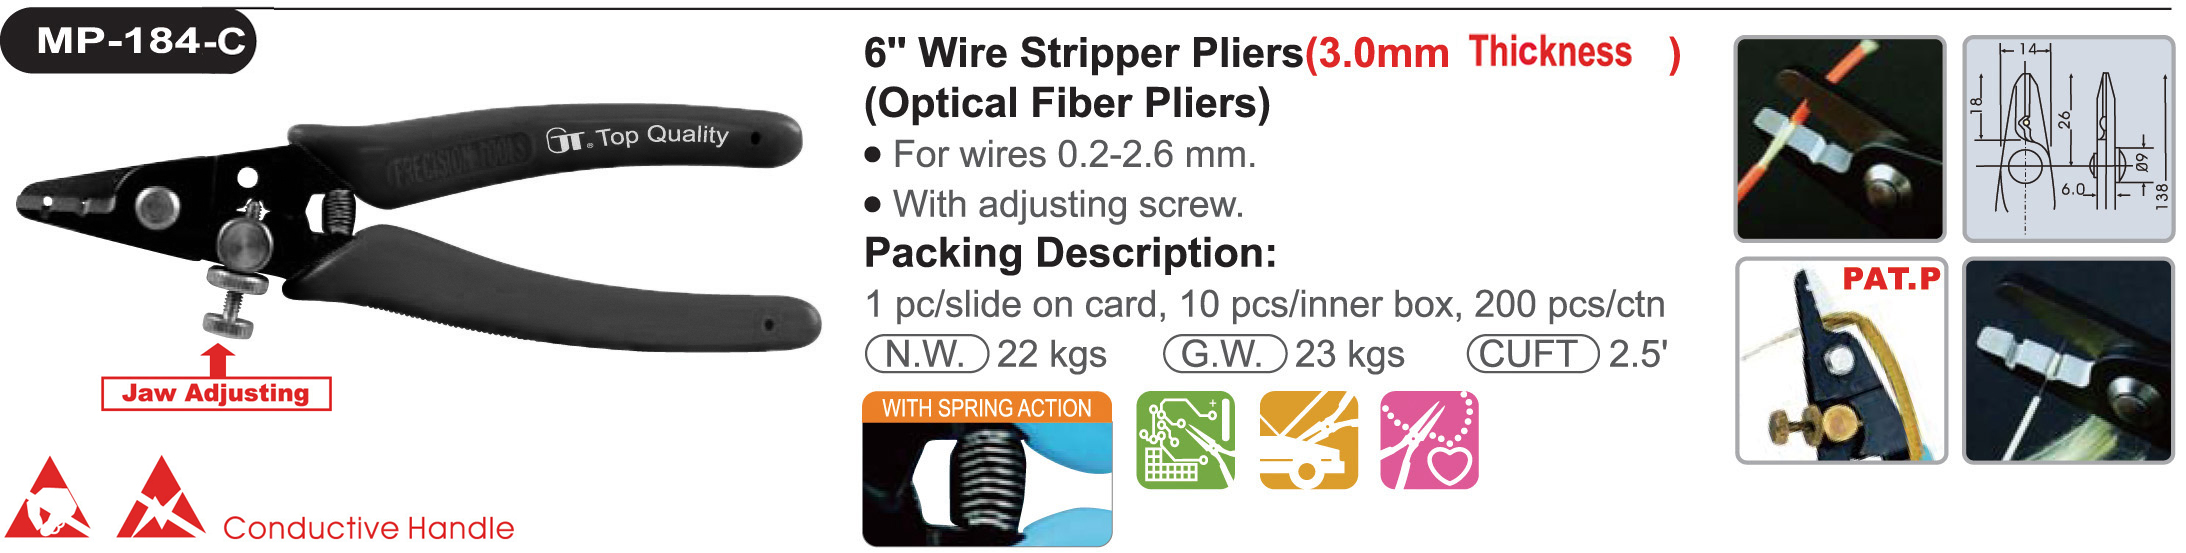 proimages/product/pliers/wire_strippers/Wire_Stripper_for_fibre_optics/MP-184C/MP-184-C.jpg